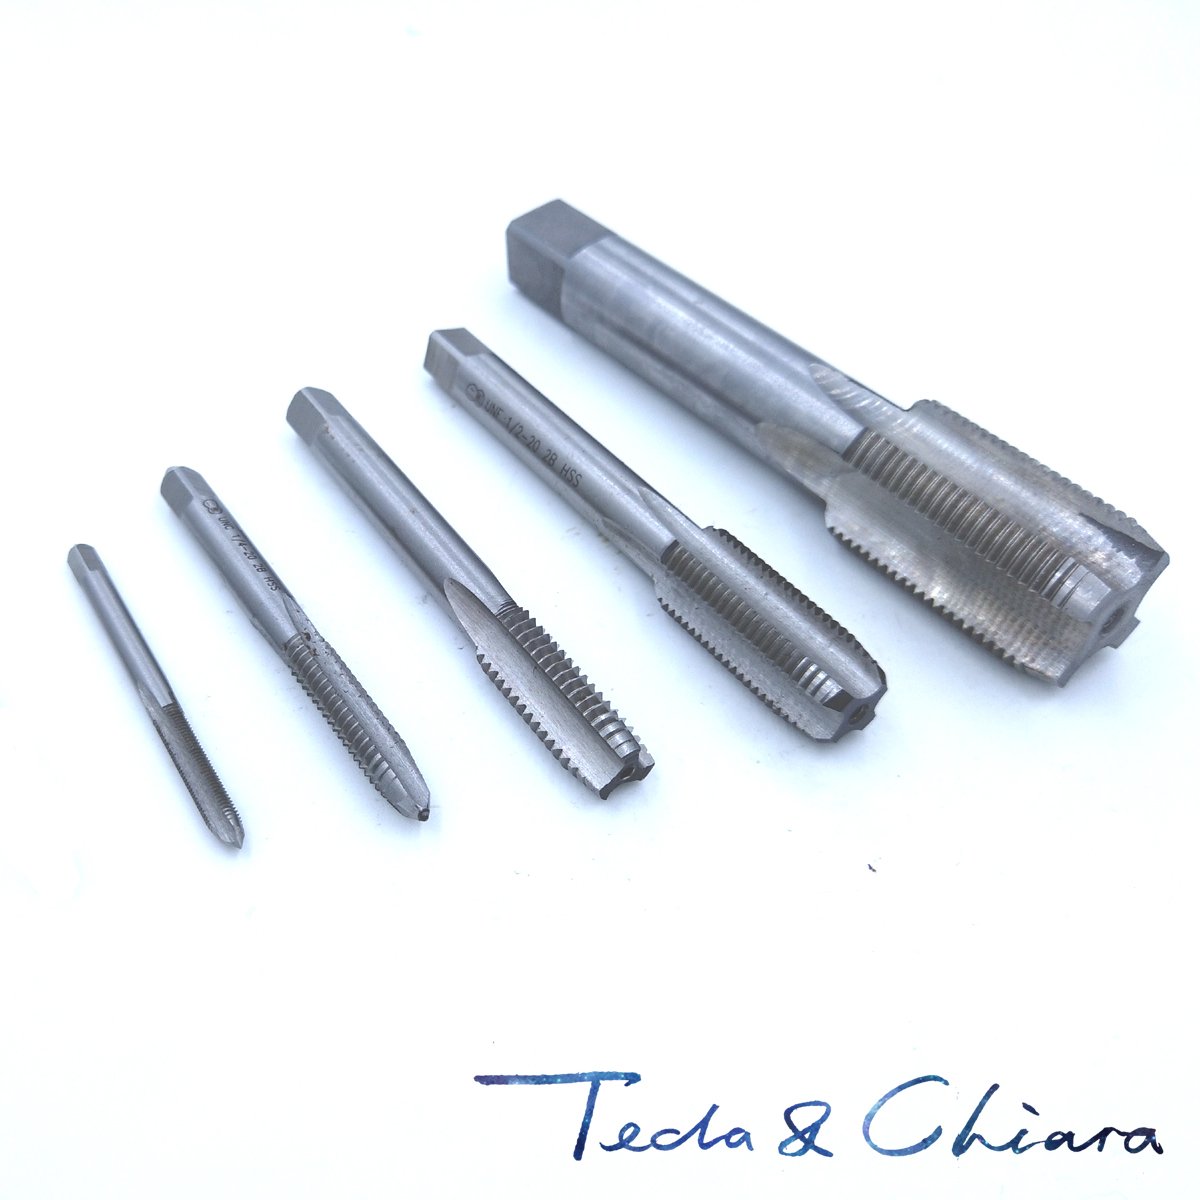 5/16-28 5/16-32 5/16-36 5/16-40 UN UNEF UNS HSS Right Hand Tap TPI Threading Tools For Mold Machining 5/16 5/16" - 28 32 36 40